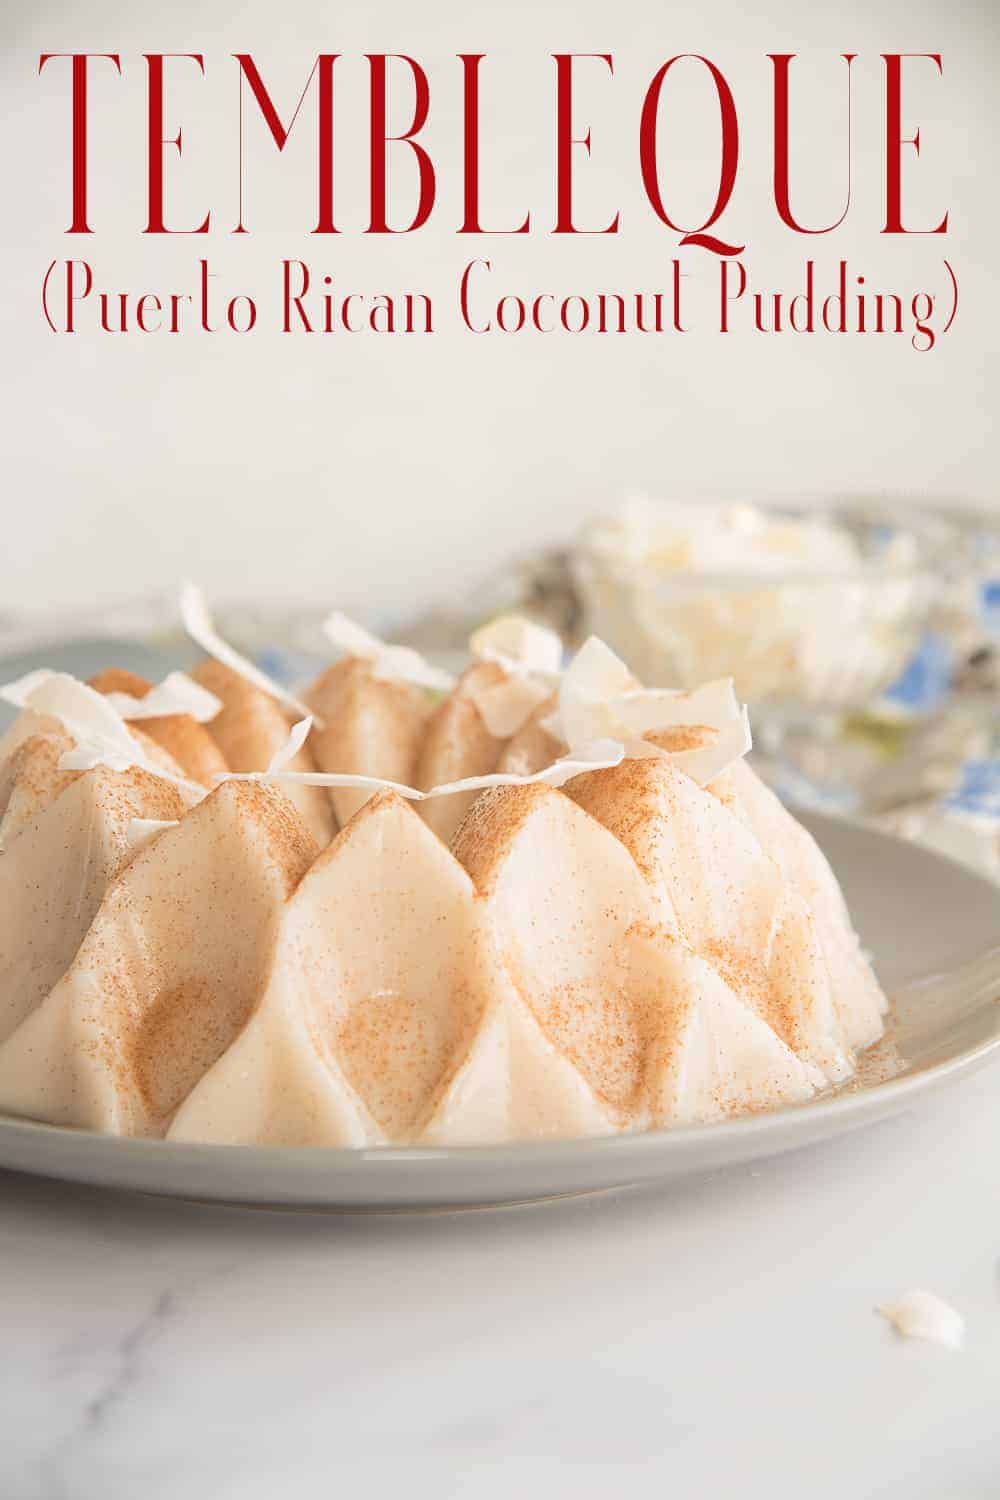 Tembleque is a popular dessert during the holidays. This Puerto Rican coconut pudding is naturally gluten-free and vegan. It's made with fresh coconut milk that's flavored with orange peel, cinnamon, and warm spices. Use canned coconut milk for an even quicker dessert. #coconutdessert #tembleque #coconutpudding #PuertoRicanrecipes #recetadetembleque #holidaydessertrecipe #nobakedessertrecipe #coconut #easydessert #pudding #flan #custard #Christmasdessert via @ediblesense